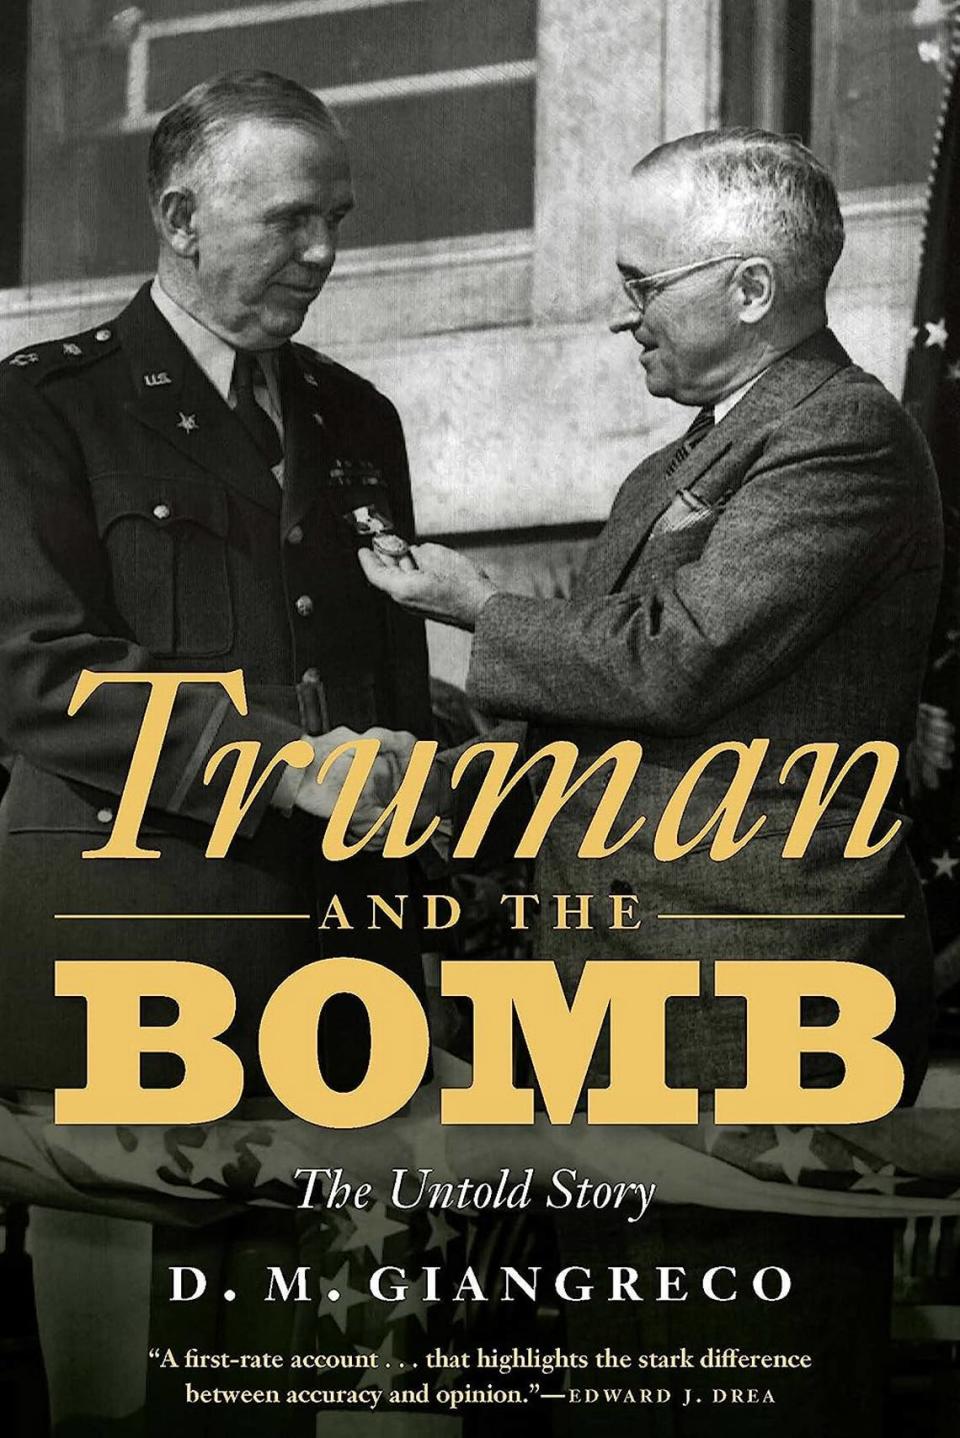 “Truman and the Bomb: The Untold Story” is Dennis Giangreco’s third book about former President Harry Truman.